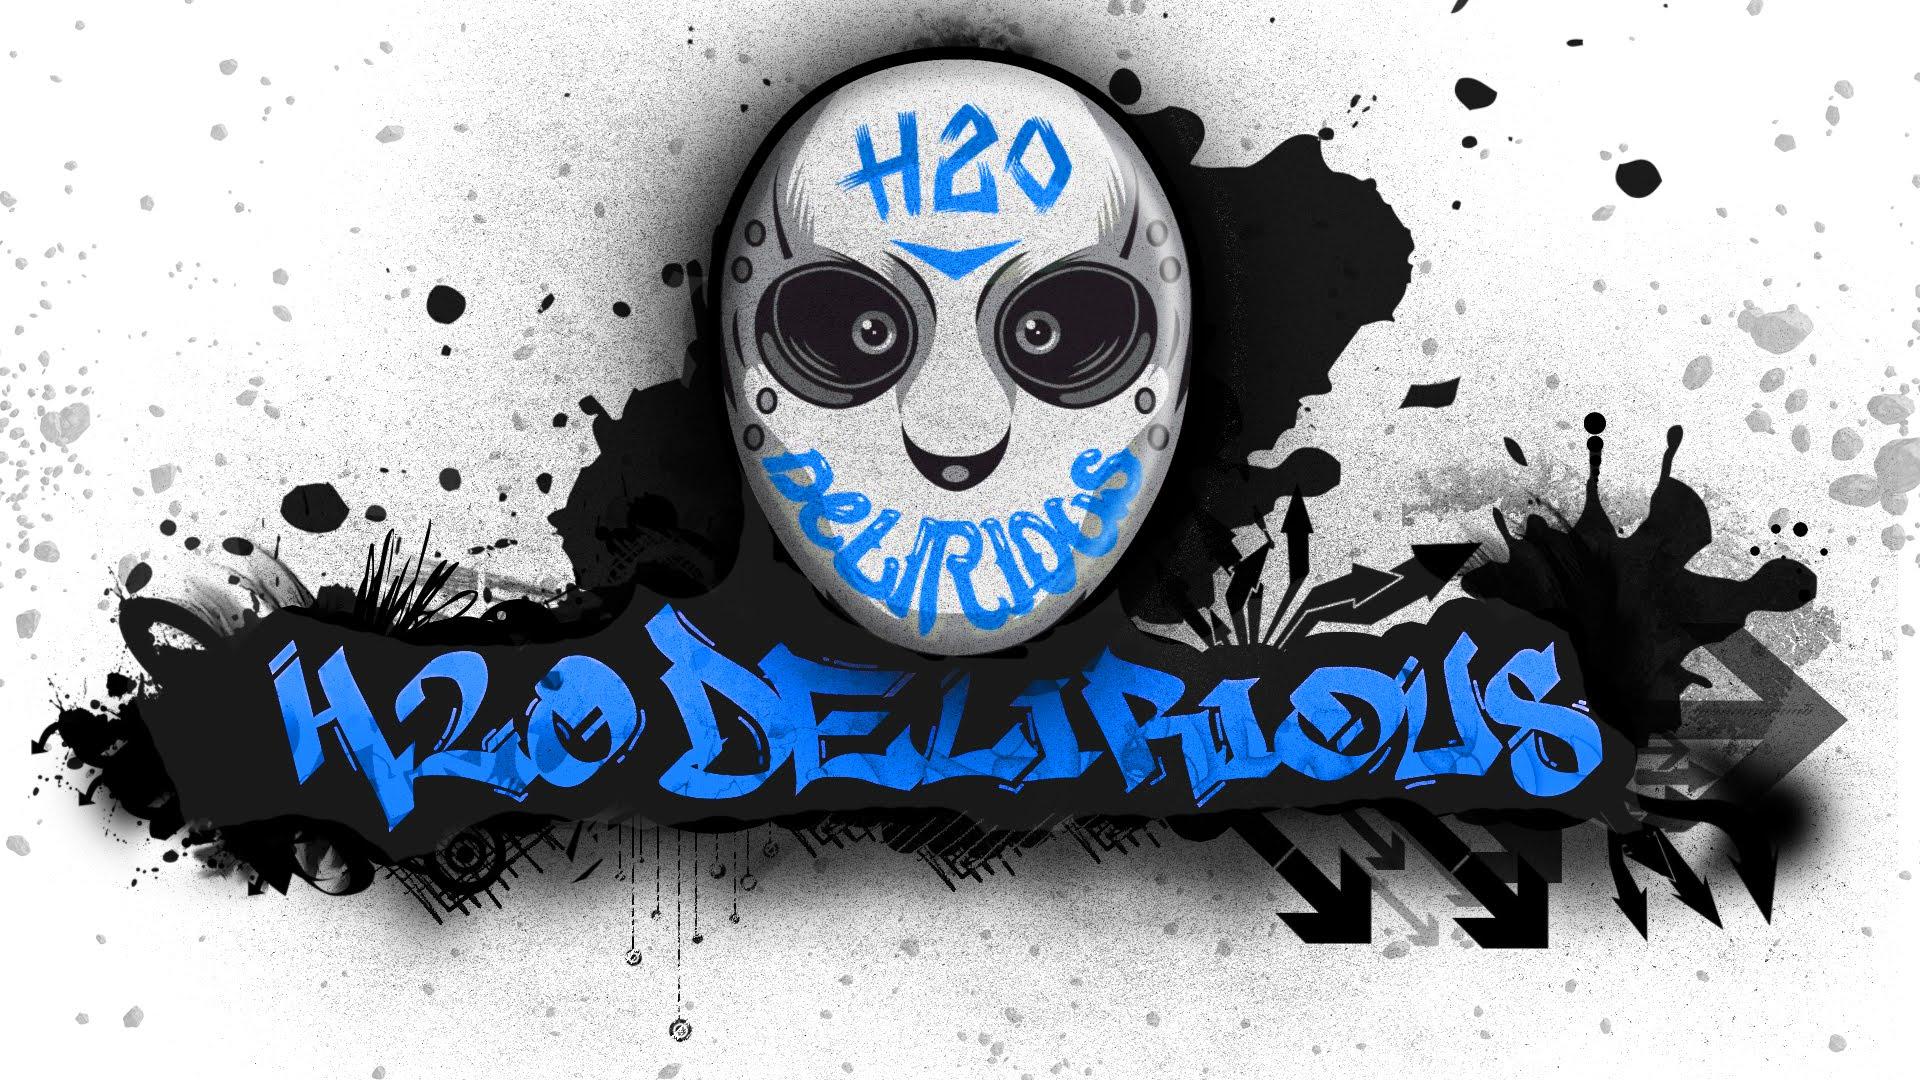 H2O Delirious image H2O DELIRIOUS Fan Art HD wallpapers and.